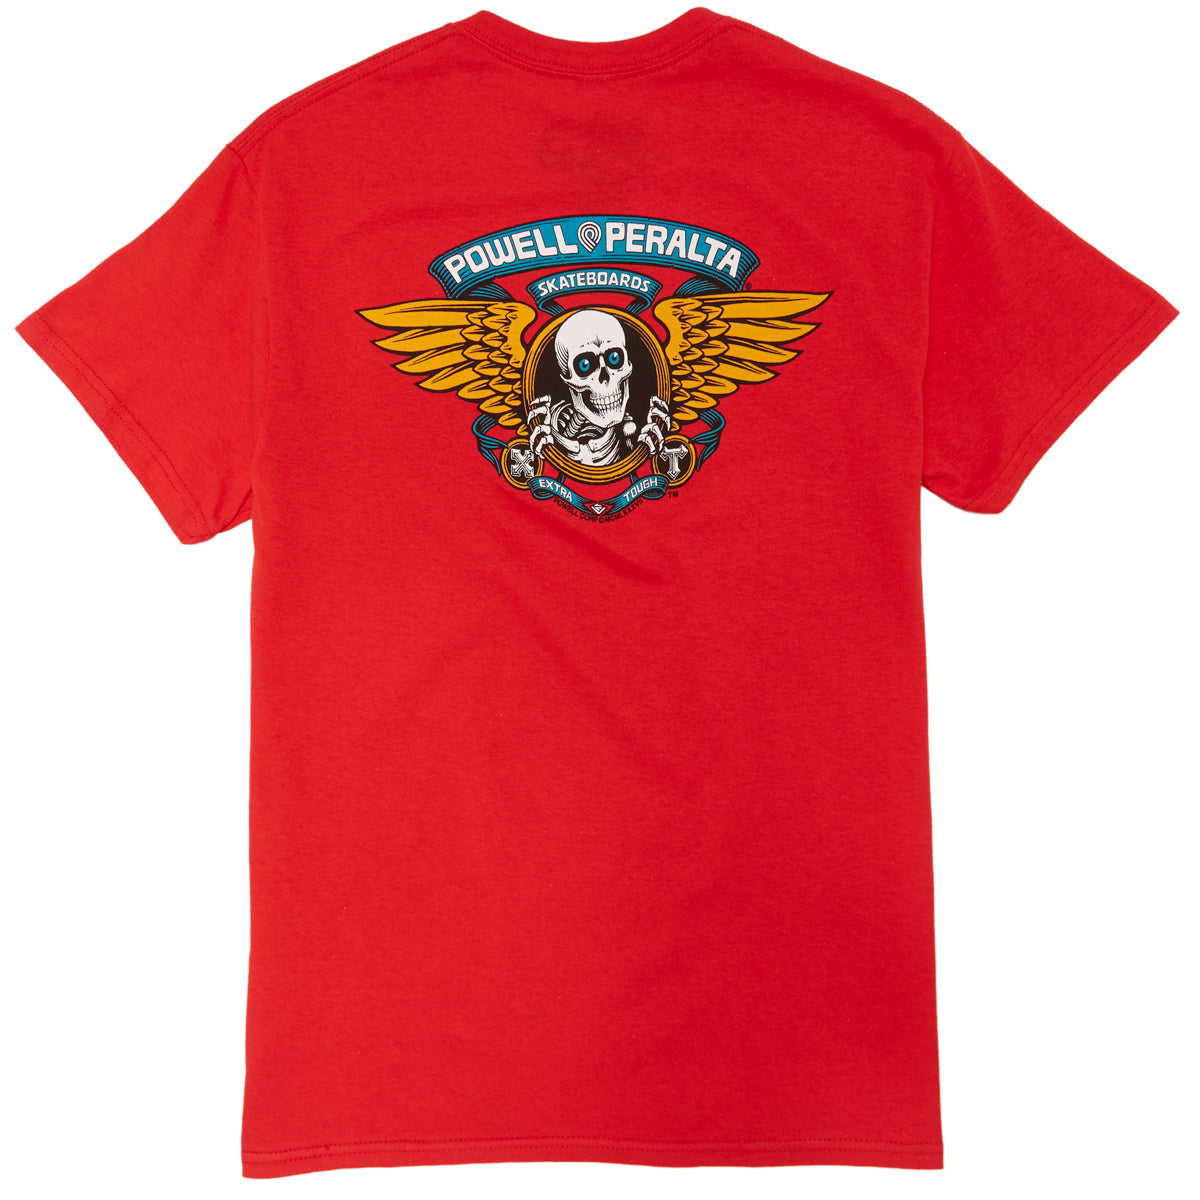 Powell-Peralta Winged Ripper T-Shirt - Red image 1